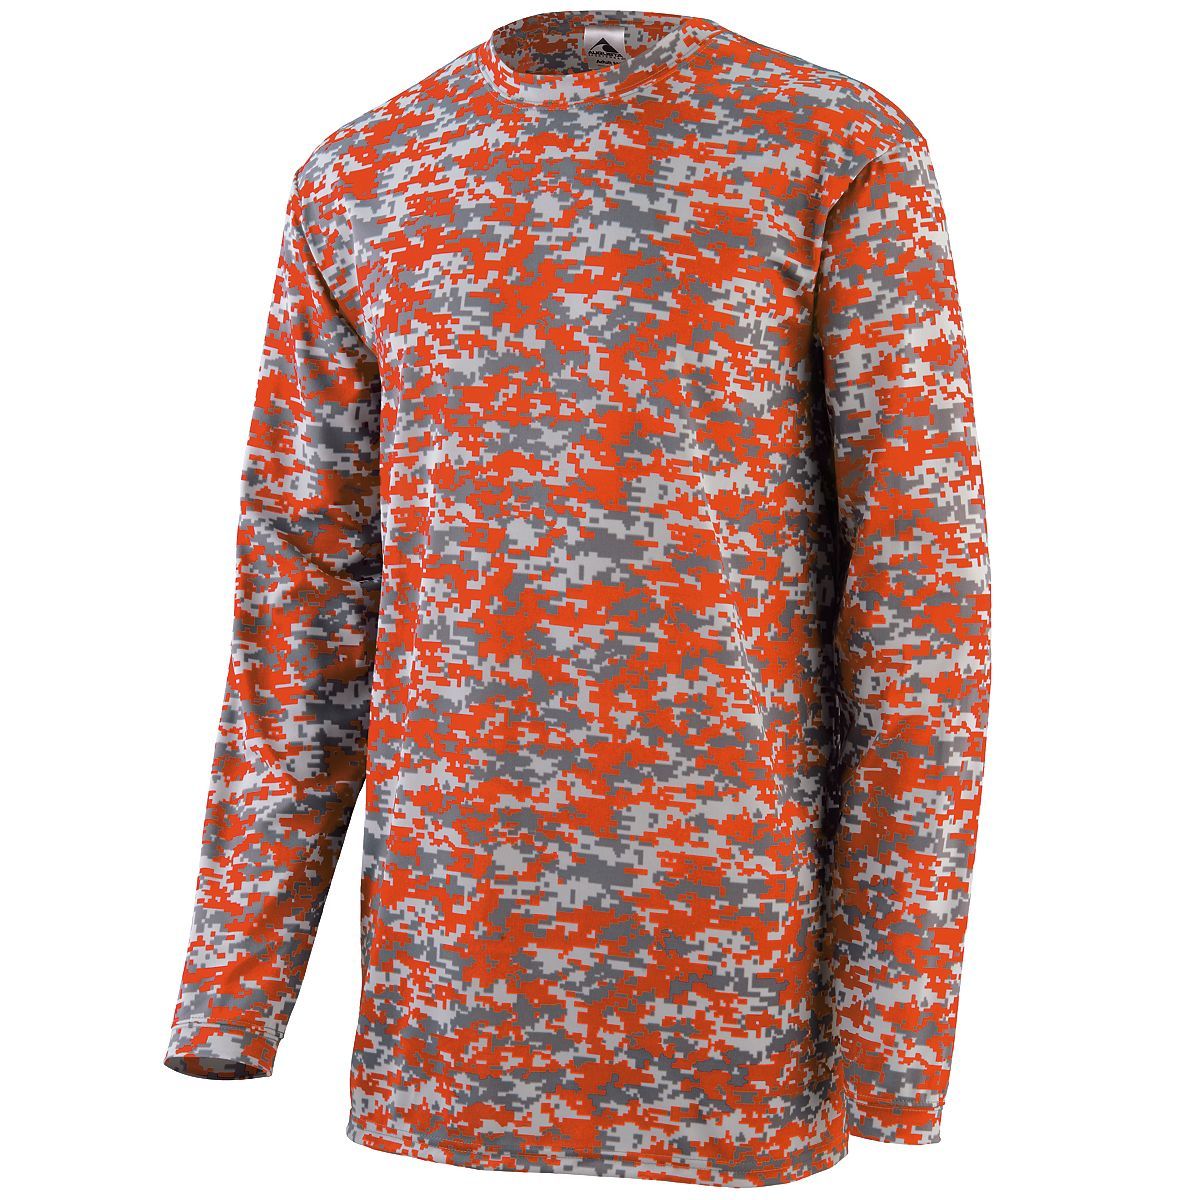 Augusta Sportswear Digi Camo Wicking Long Sleeve T-Shirt in Orange Digi  -Part of the Adult, Adult-Tee-Shirt, T-Shirts, Augusta-Products, Shirts product lines at KanaleyCreations.com